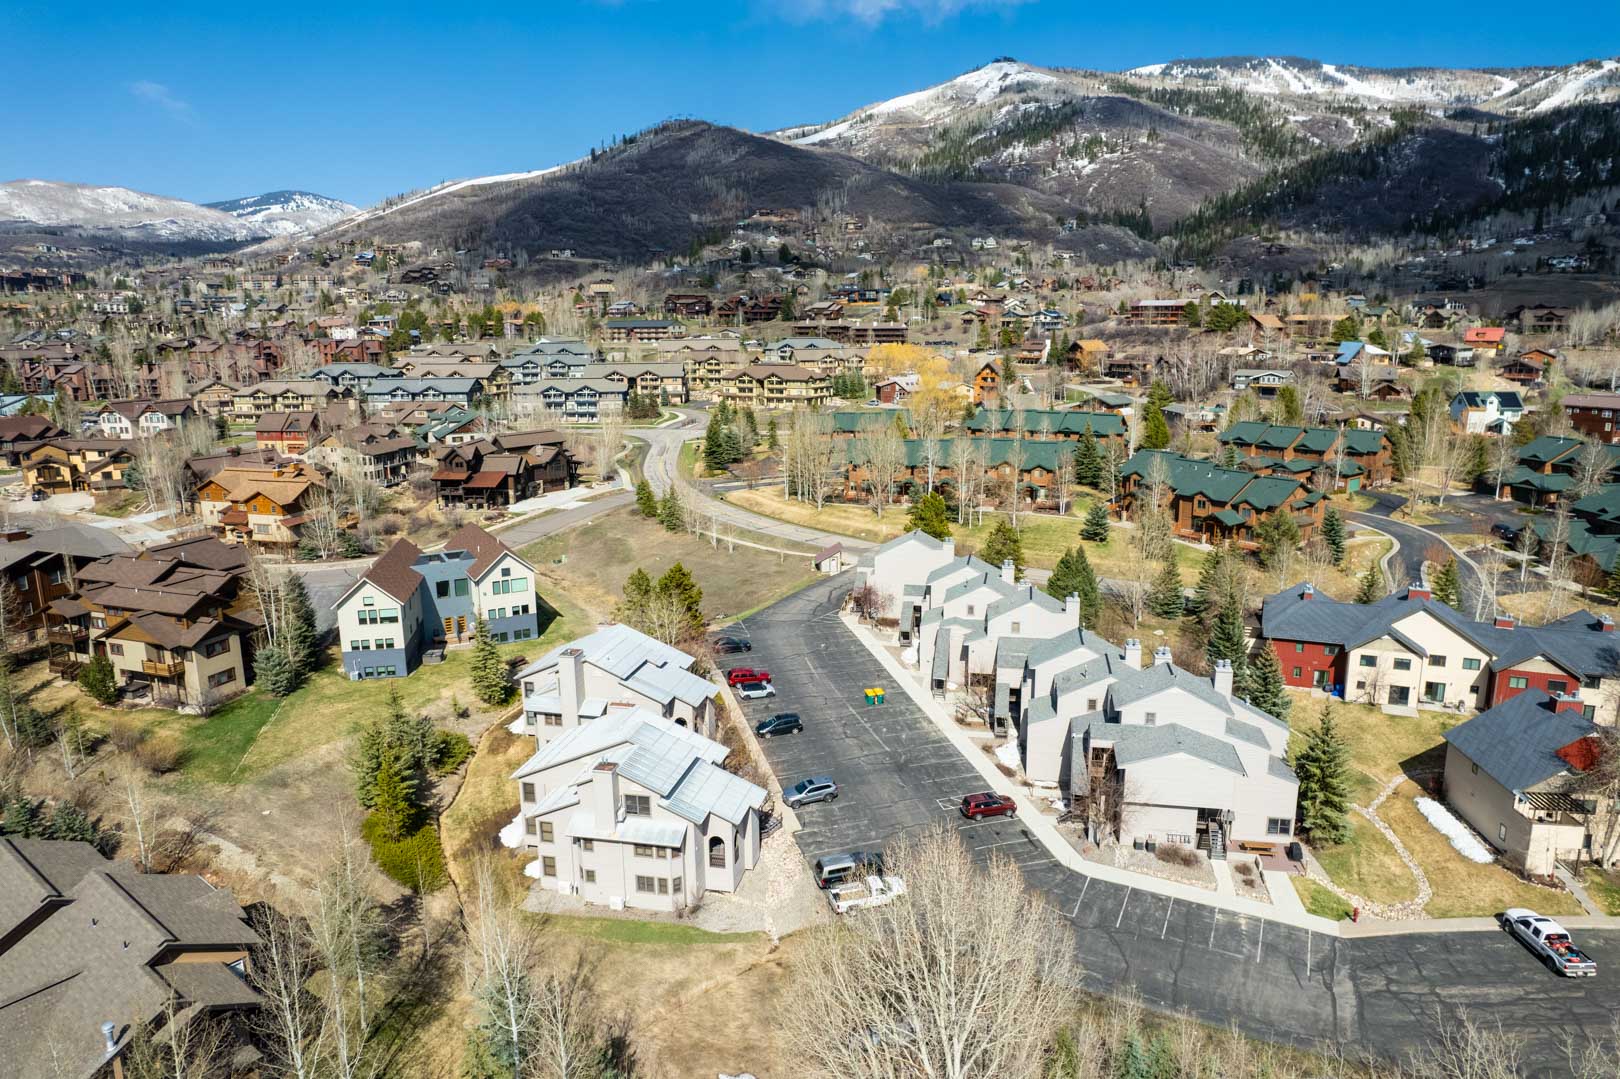 An overlook of the town at VRI's Sunburst Resort in Steamboat Springs, CO.